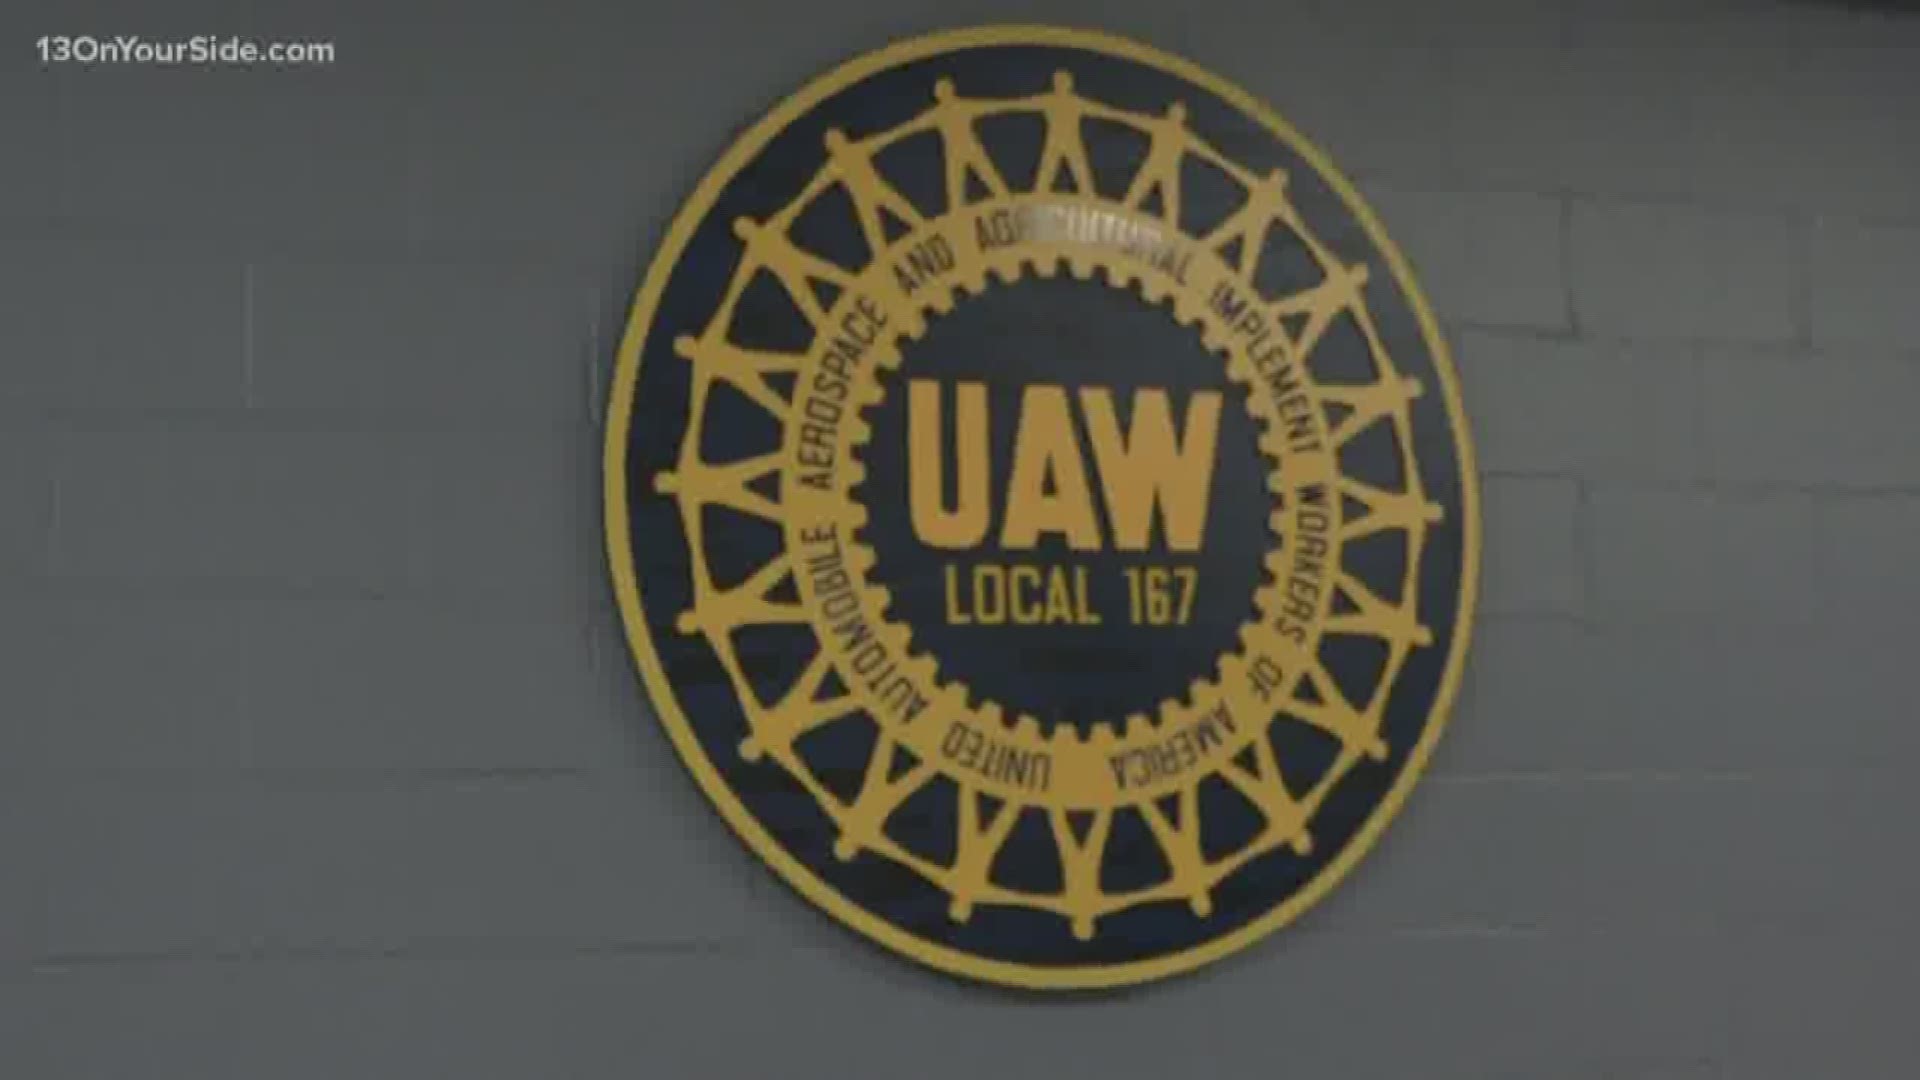 The union said Saturday that weekly pay will rise to $275 from $250 for members on strike.